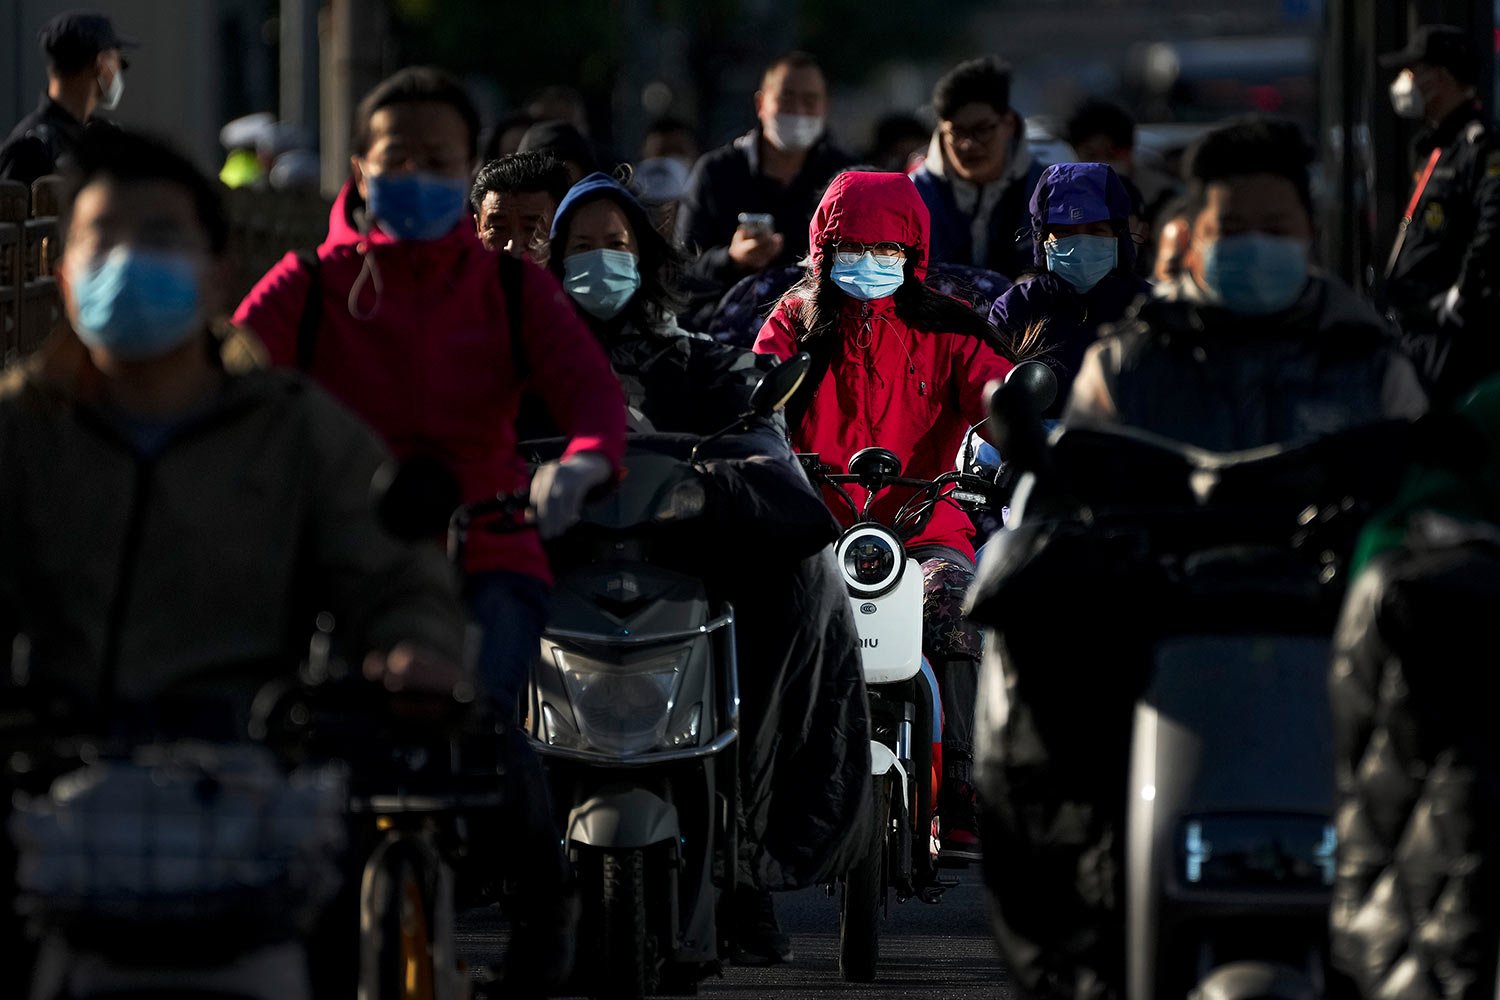  Motorists ride their electric-powered scooters on a street during the opening ceremony of the 20th National Congress of China's ruling Communist Party in Beijing, Sunday, Oct. 16, 2022. (AP Photo/Andy Wong) 